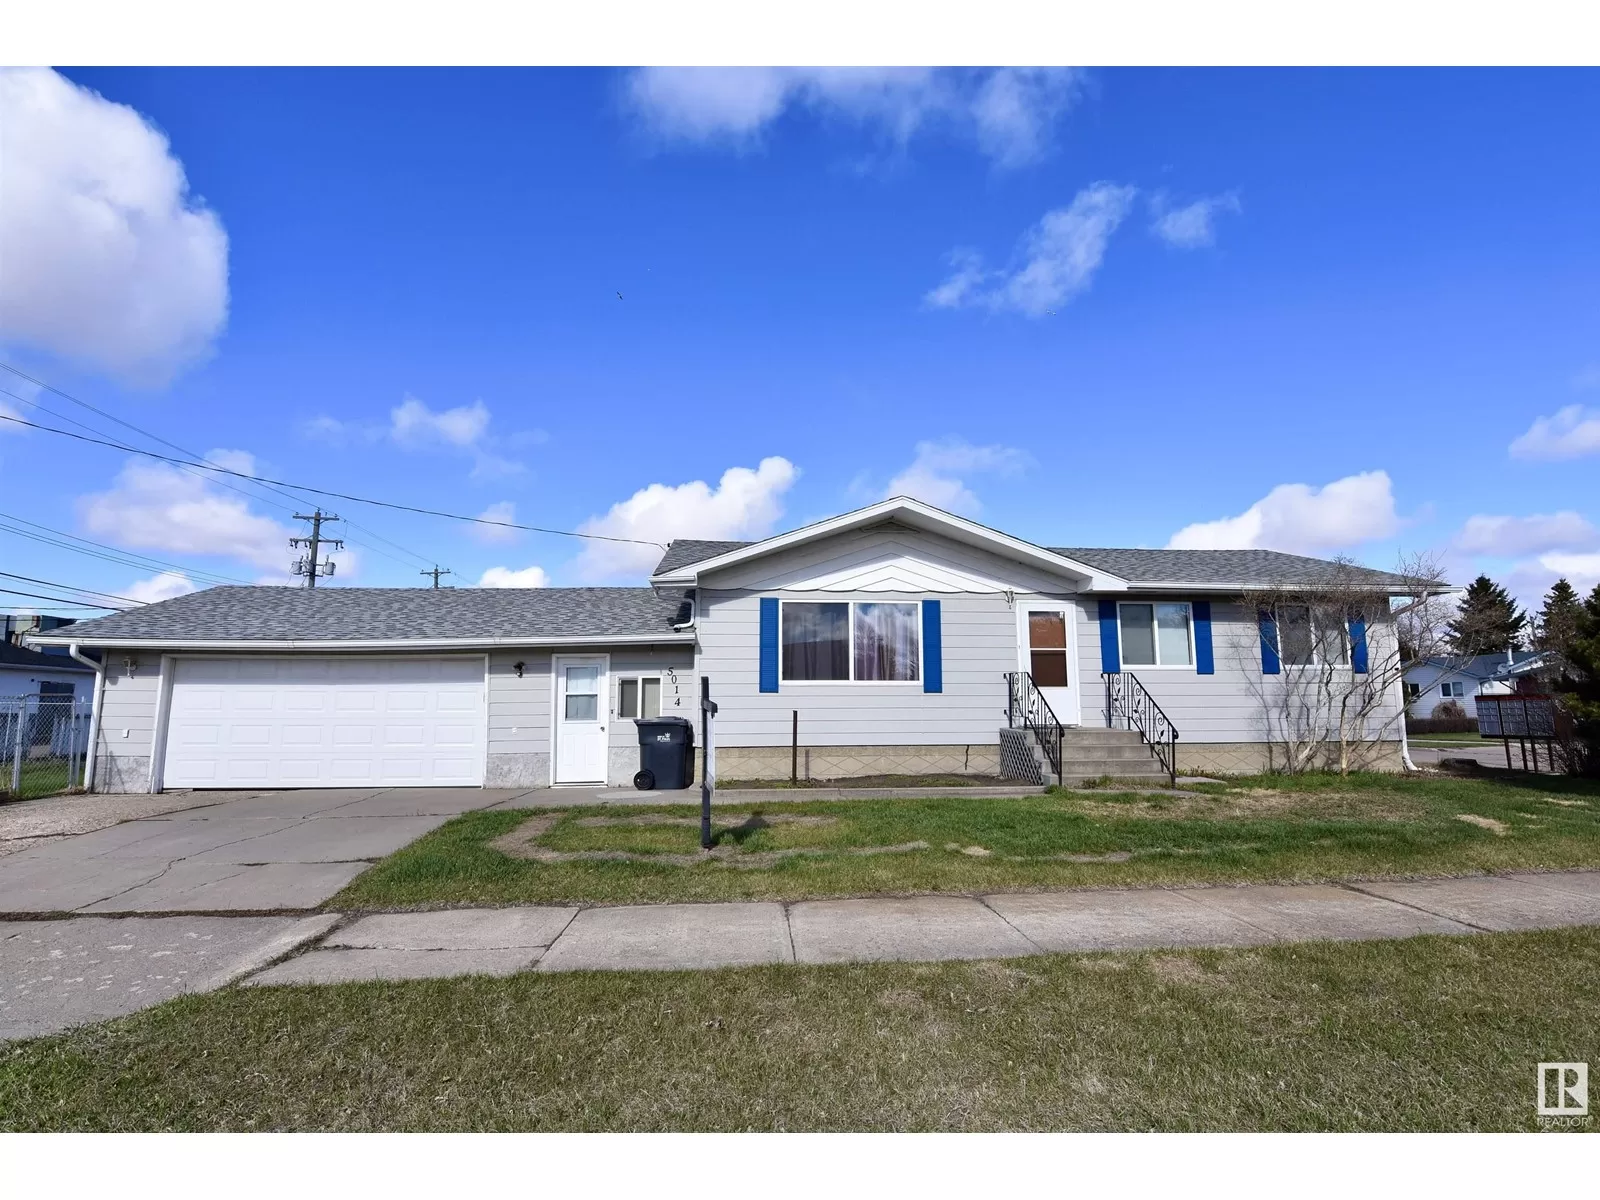 House for rent: 5014 45 St, St. Paul Town, Alberta T0A 3A2